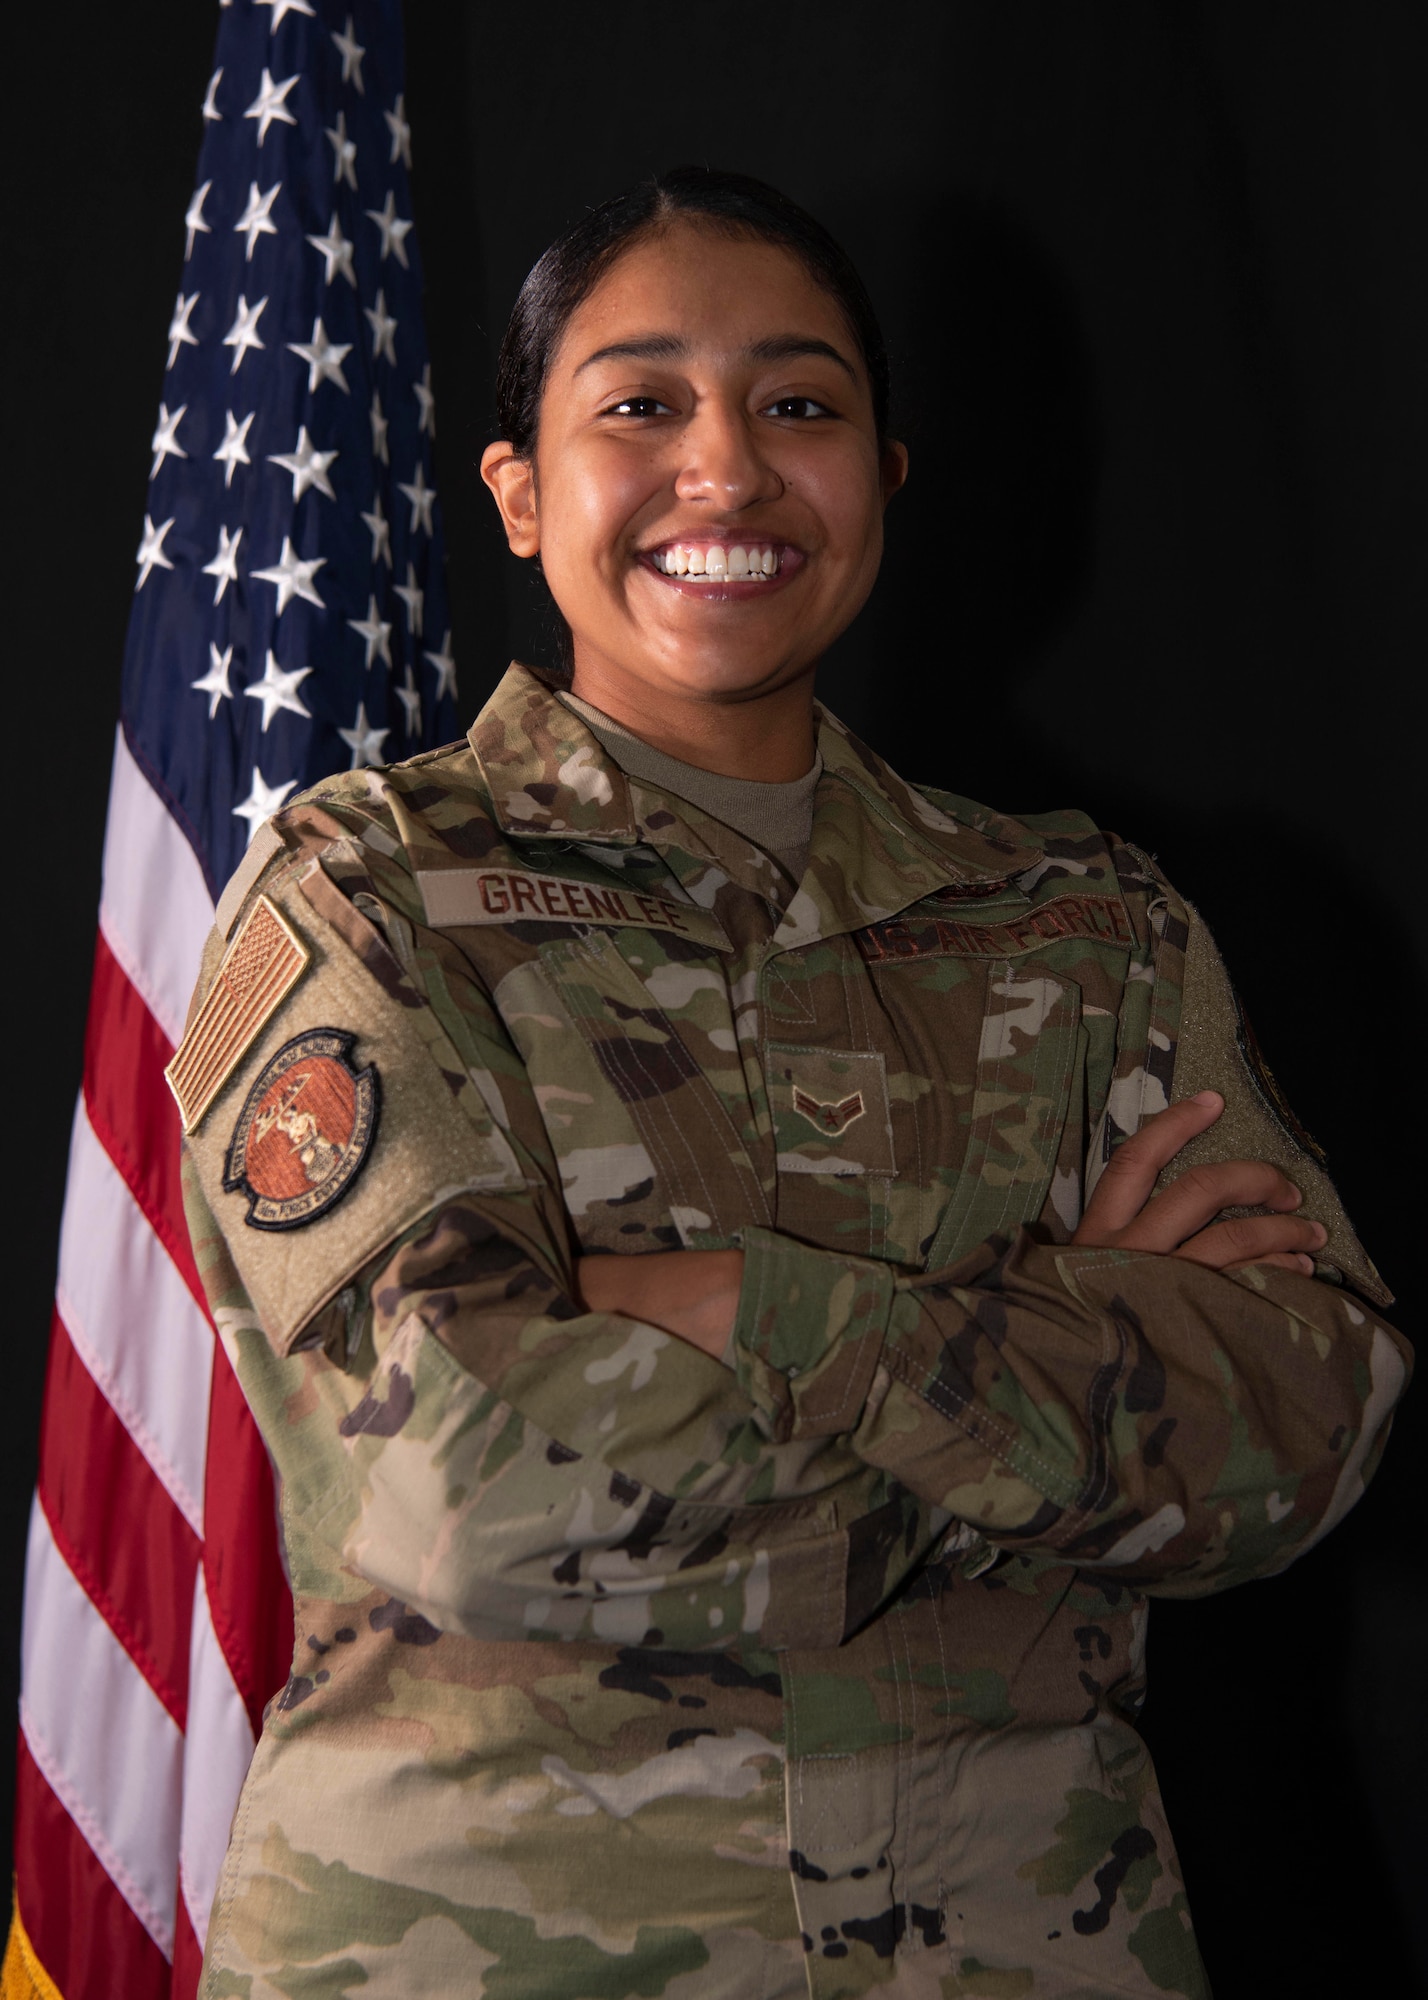 Airman 1st Class Jessica Makenna Martinez Greenlee, 36th Force Support Squadron services journeyman, poses for a portrait at Andersen Air Force Base, Guam, May 3, 2021. Although Greenlee’s childhood with 29 siblings was not the most conventional, it crafted her into the resilient woman and Airman she is today. (U.S. Air Force photo by Senior Airman Aubree Owens)